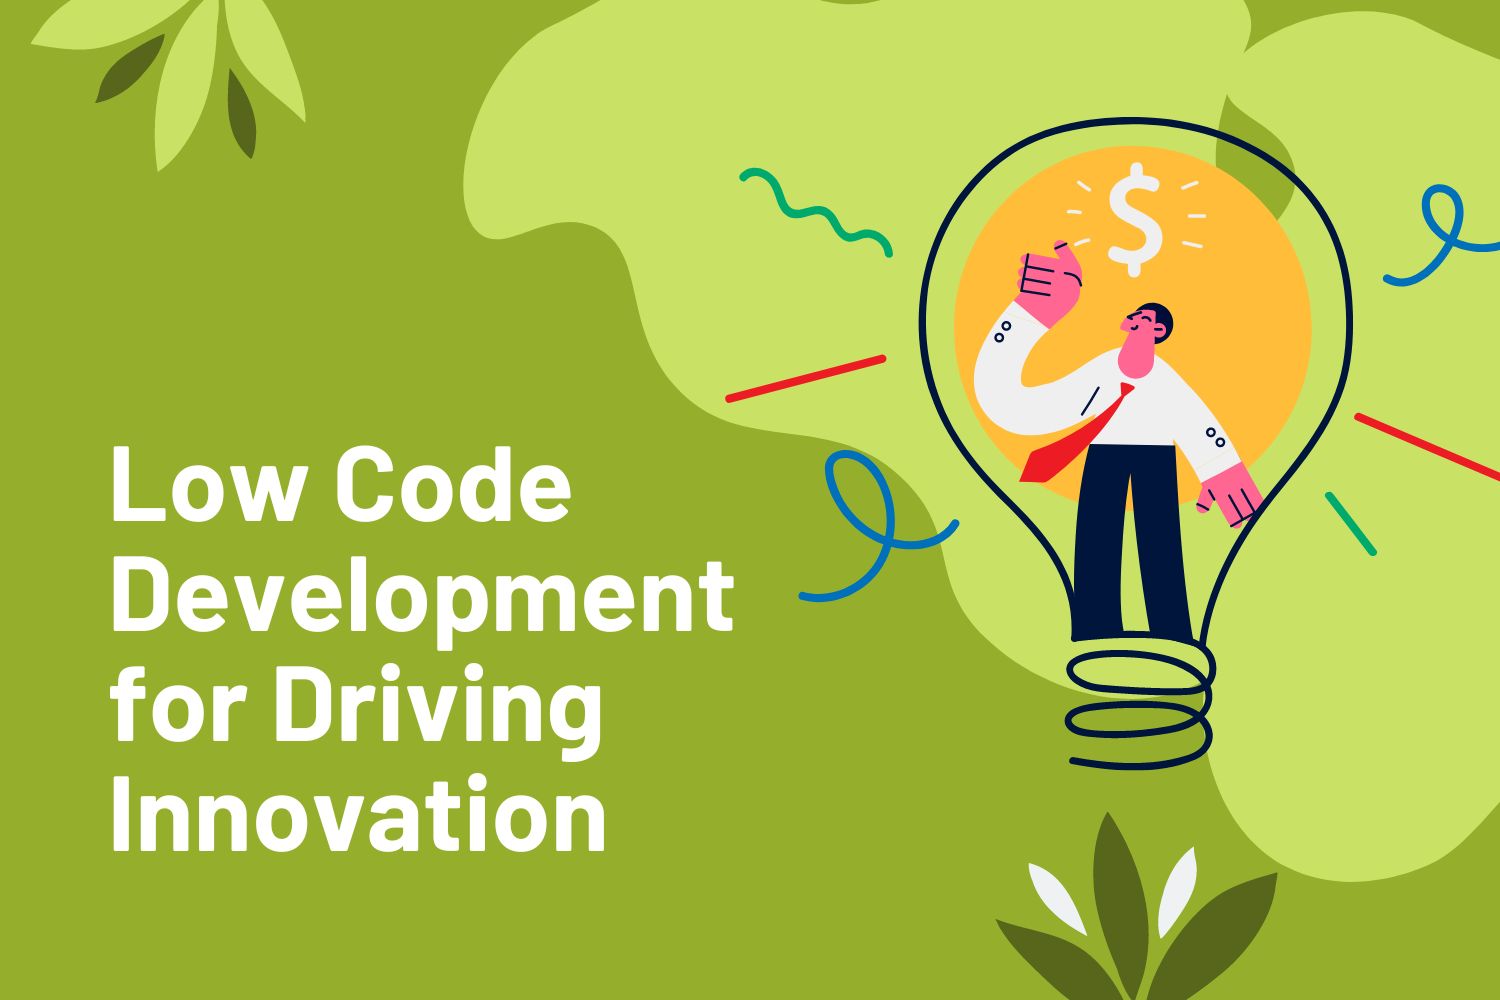 Low Code Development for Driving Innovation